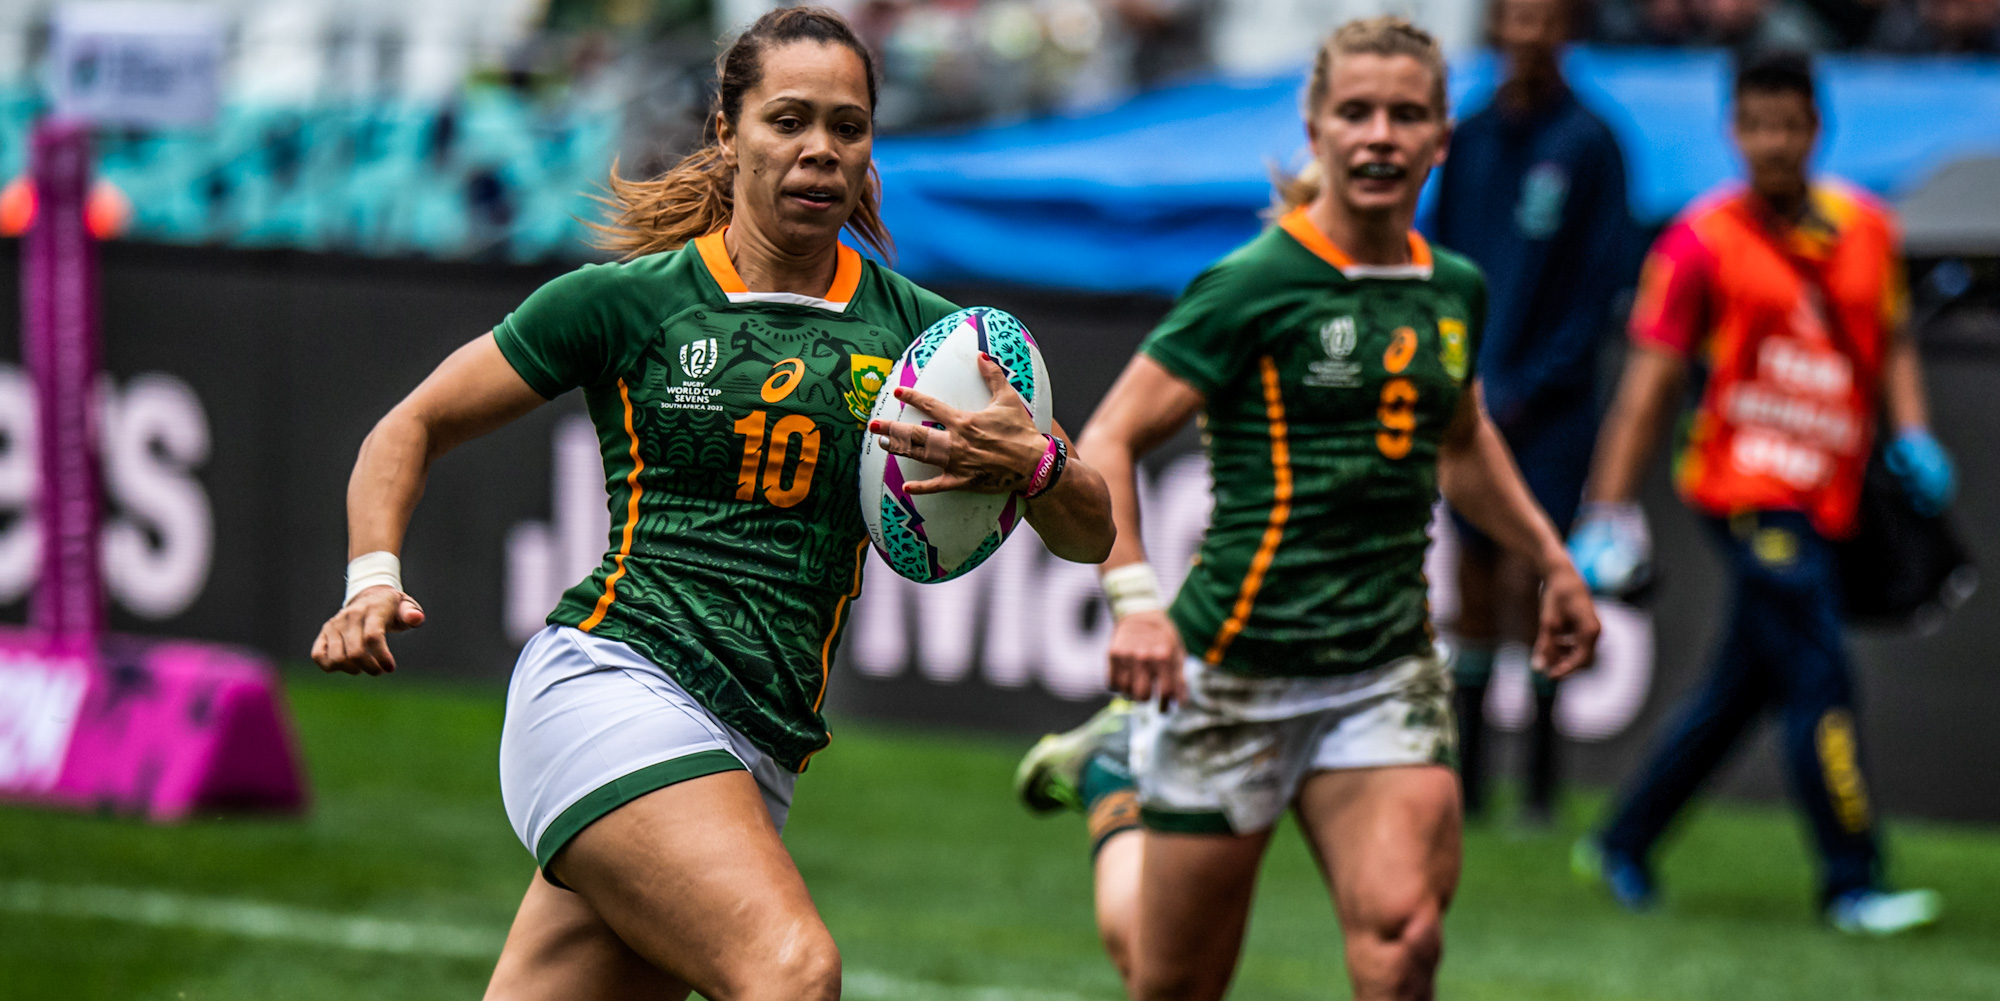 Mathrin Simmers goes over for her try against Colombia.